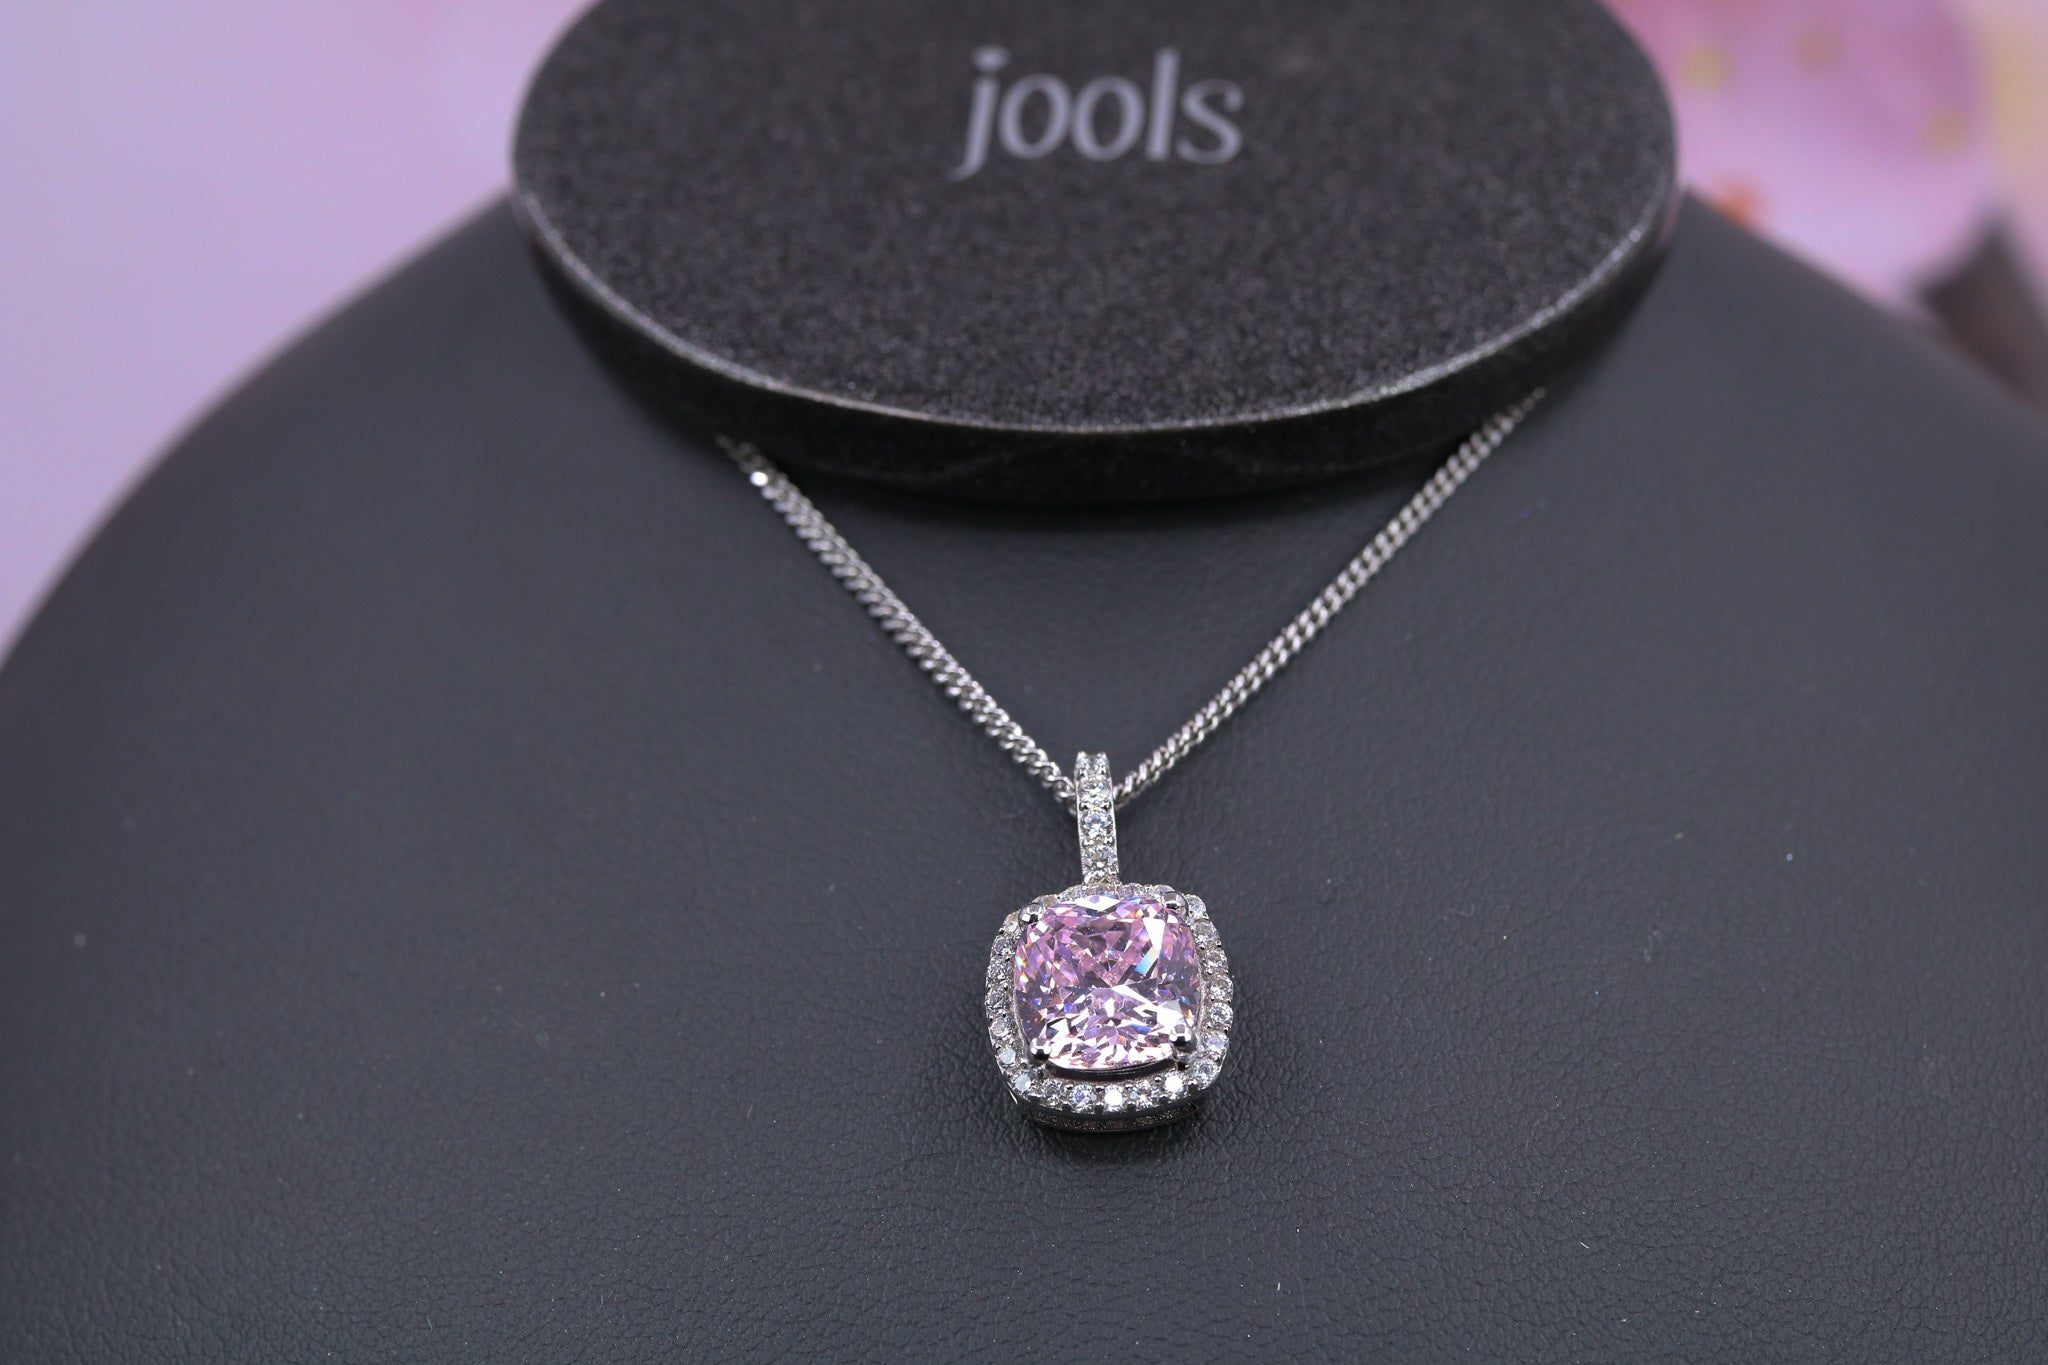 Jools Sterling Silver Pendant & Chain - JL1002 - Hallmark Jewellers Formby & The Jewellers Bench Widnes